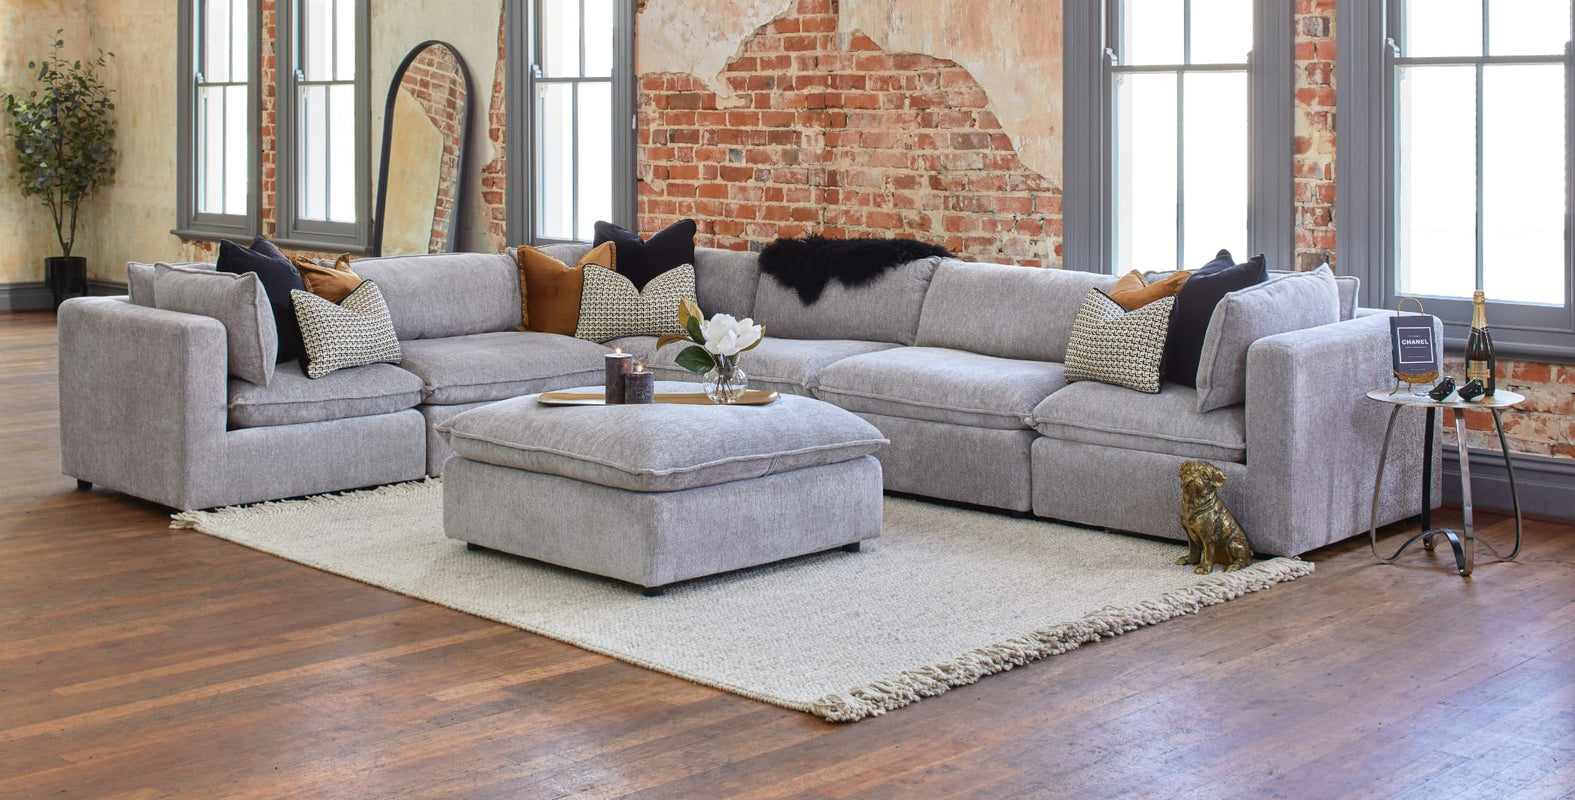 Sectional Sofa in Grey Colour